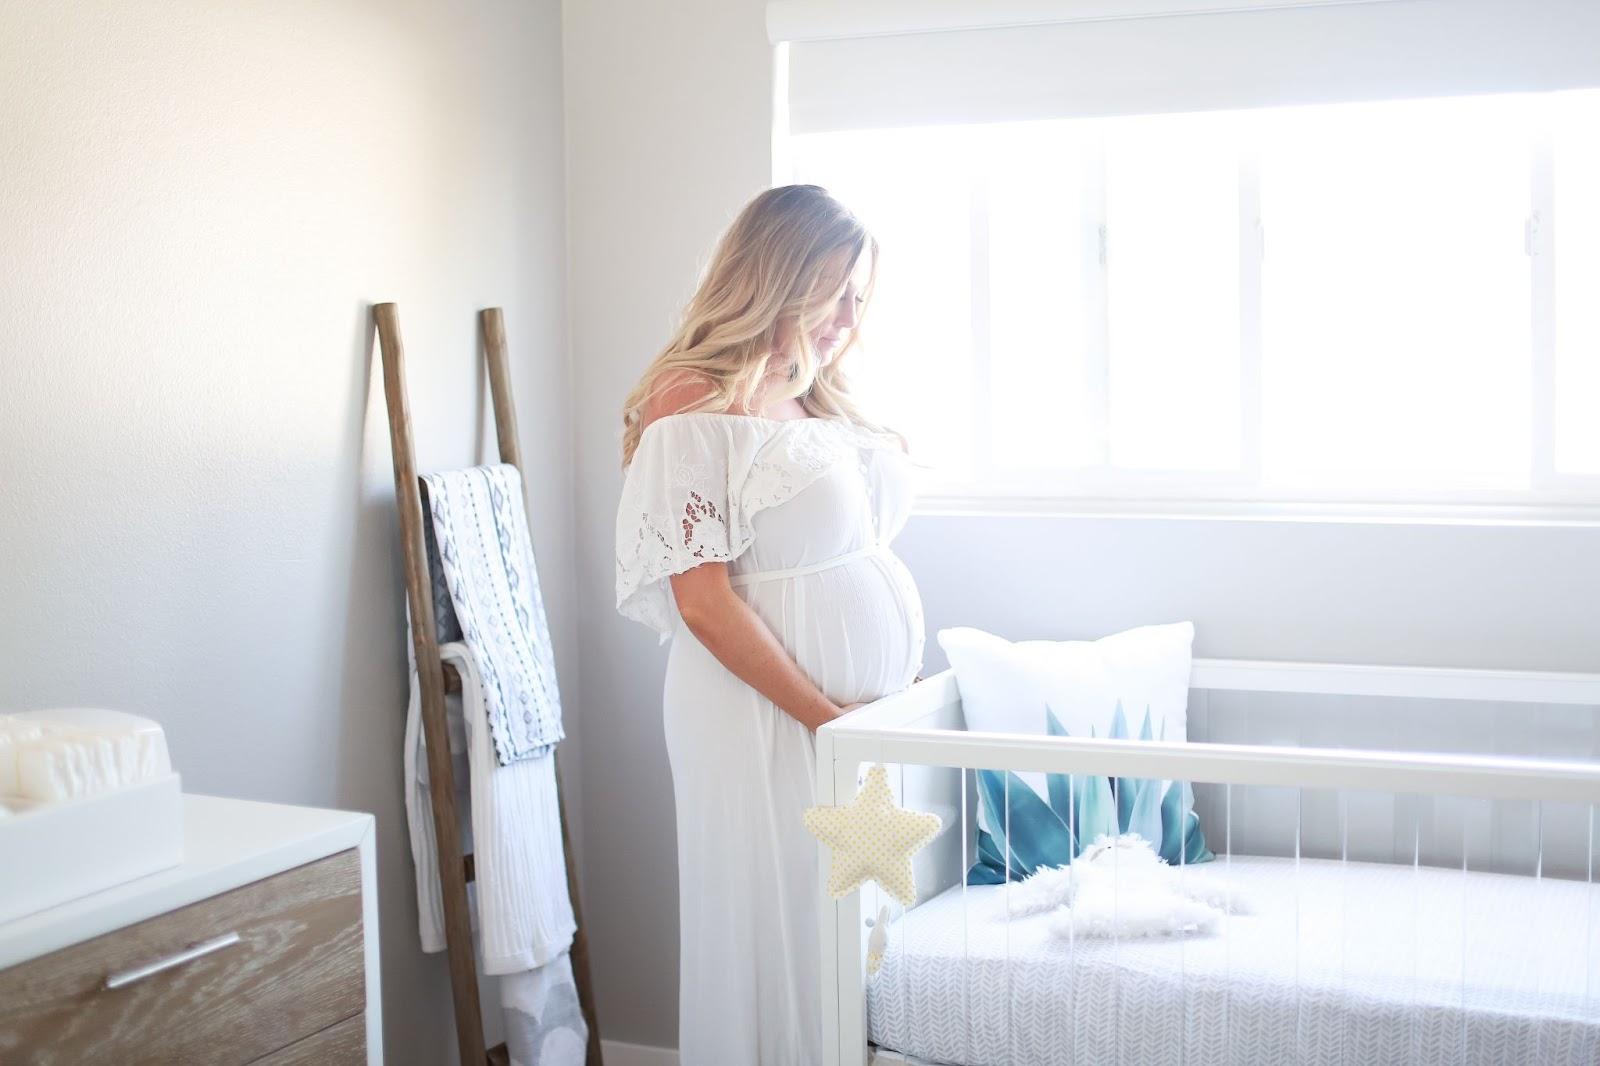 Intended parents may wonder, when using donor eggs, will I love my baby? In this post, mother via donor eggs shares her experience overcoming this fear. Check it out!